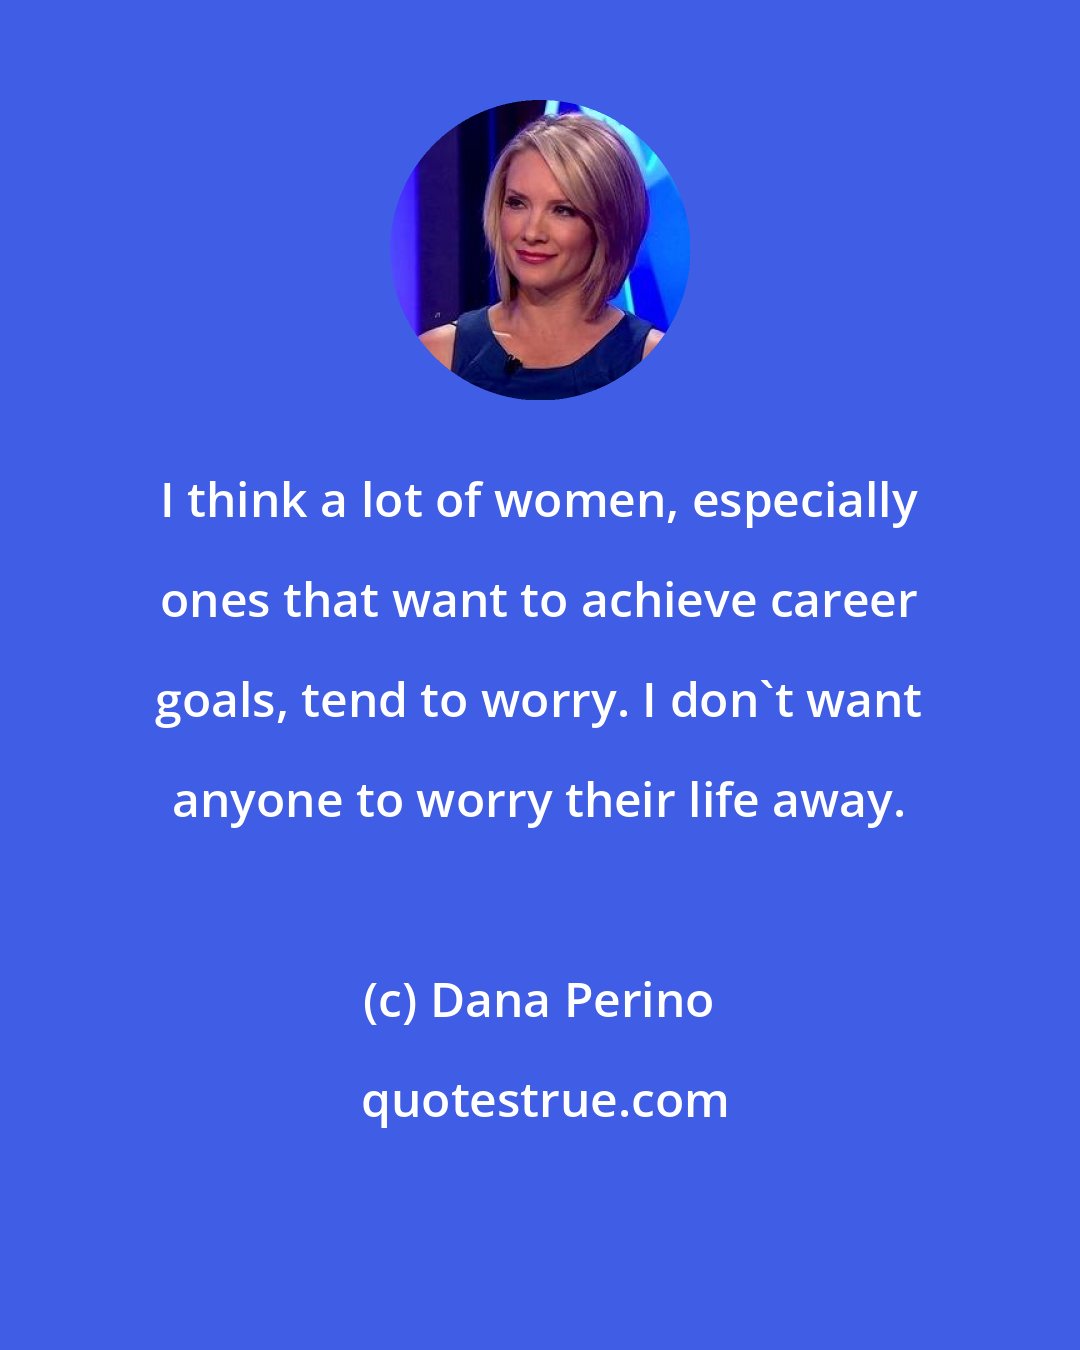 Dana Perino: I think a lot of women, especially ones that want to achieve career goals, tend to worry. I don't want anyone to worry their life away.